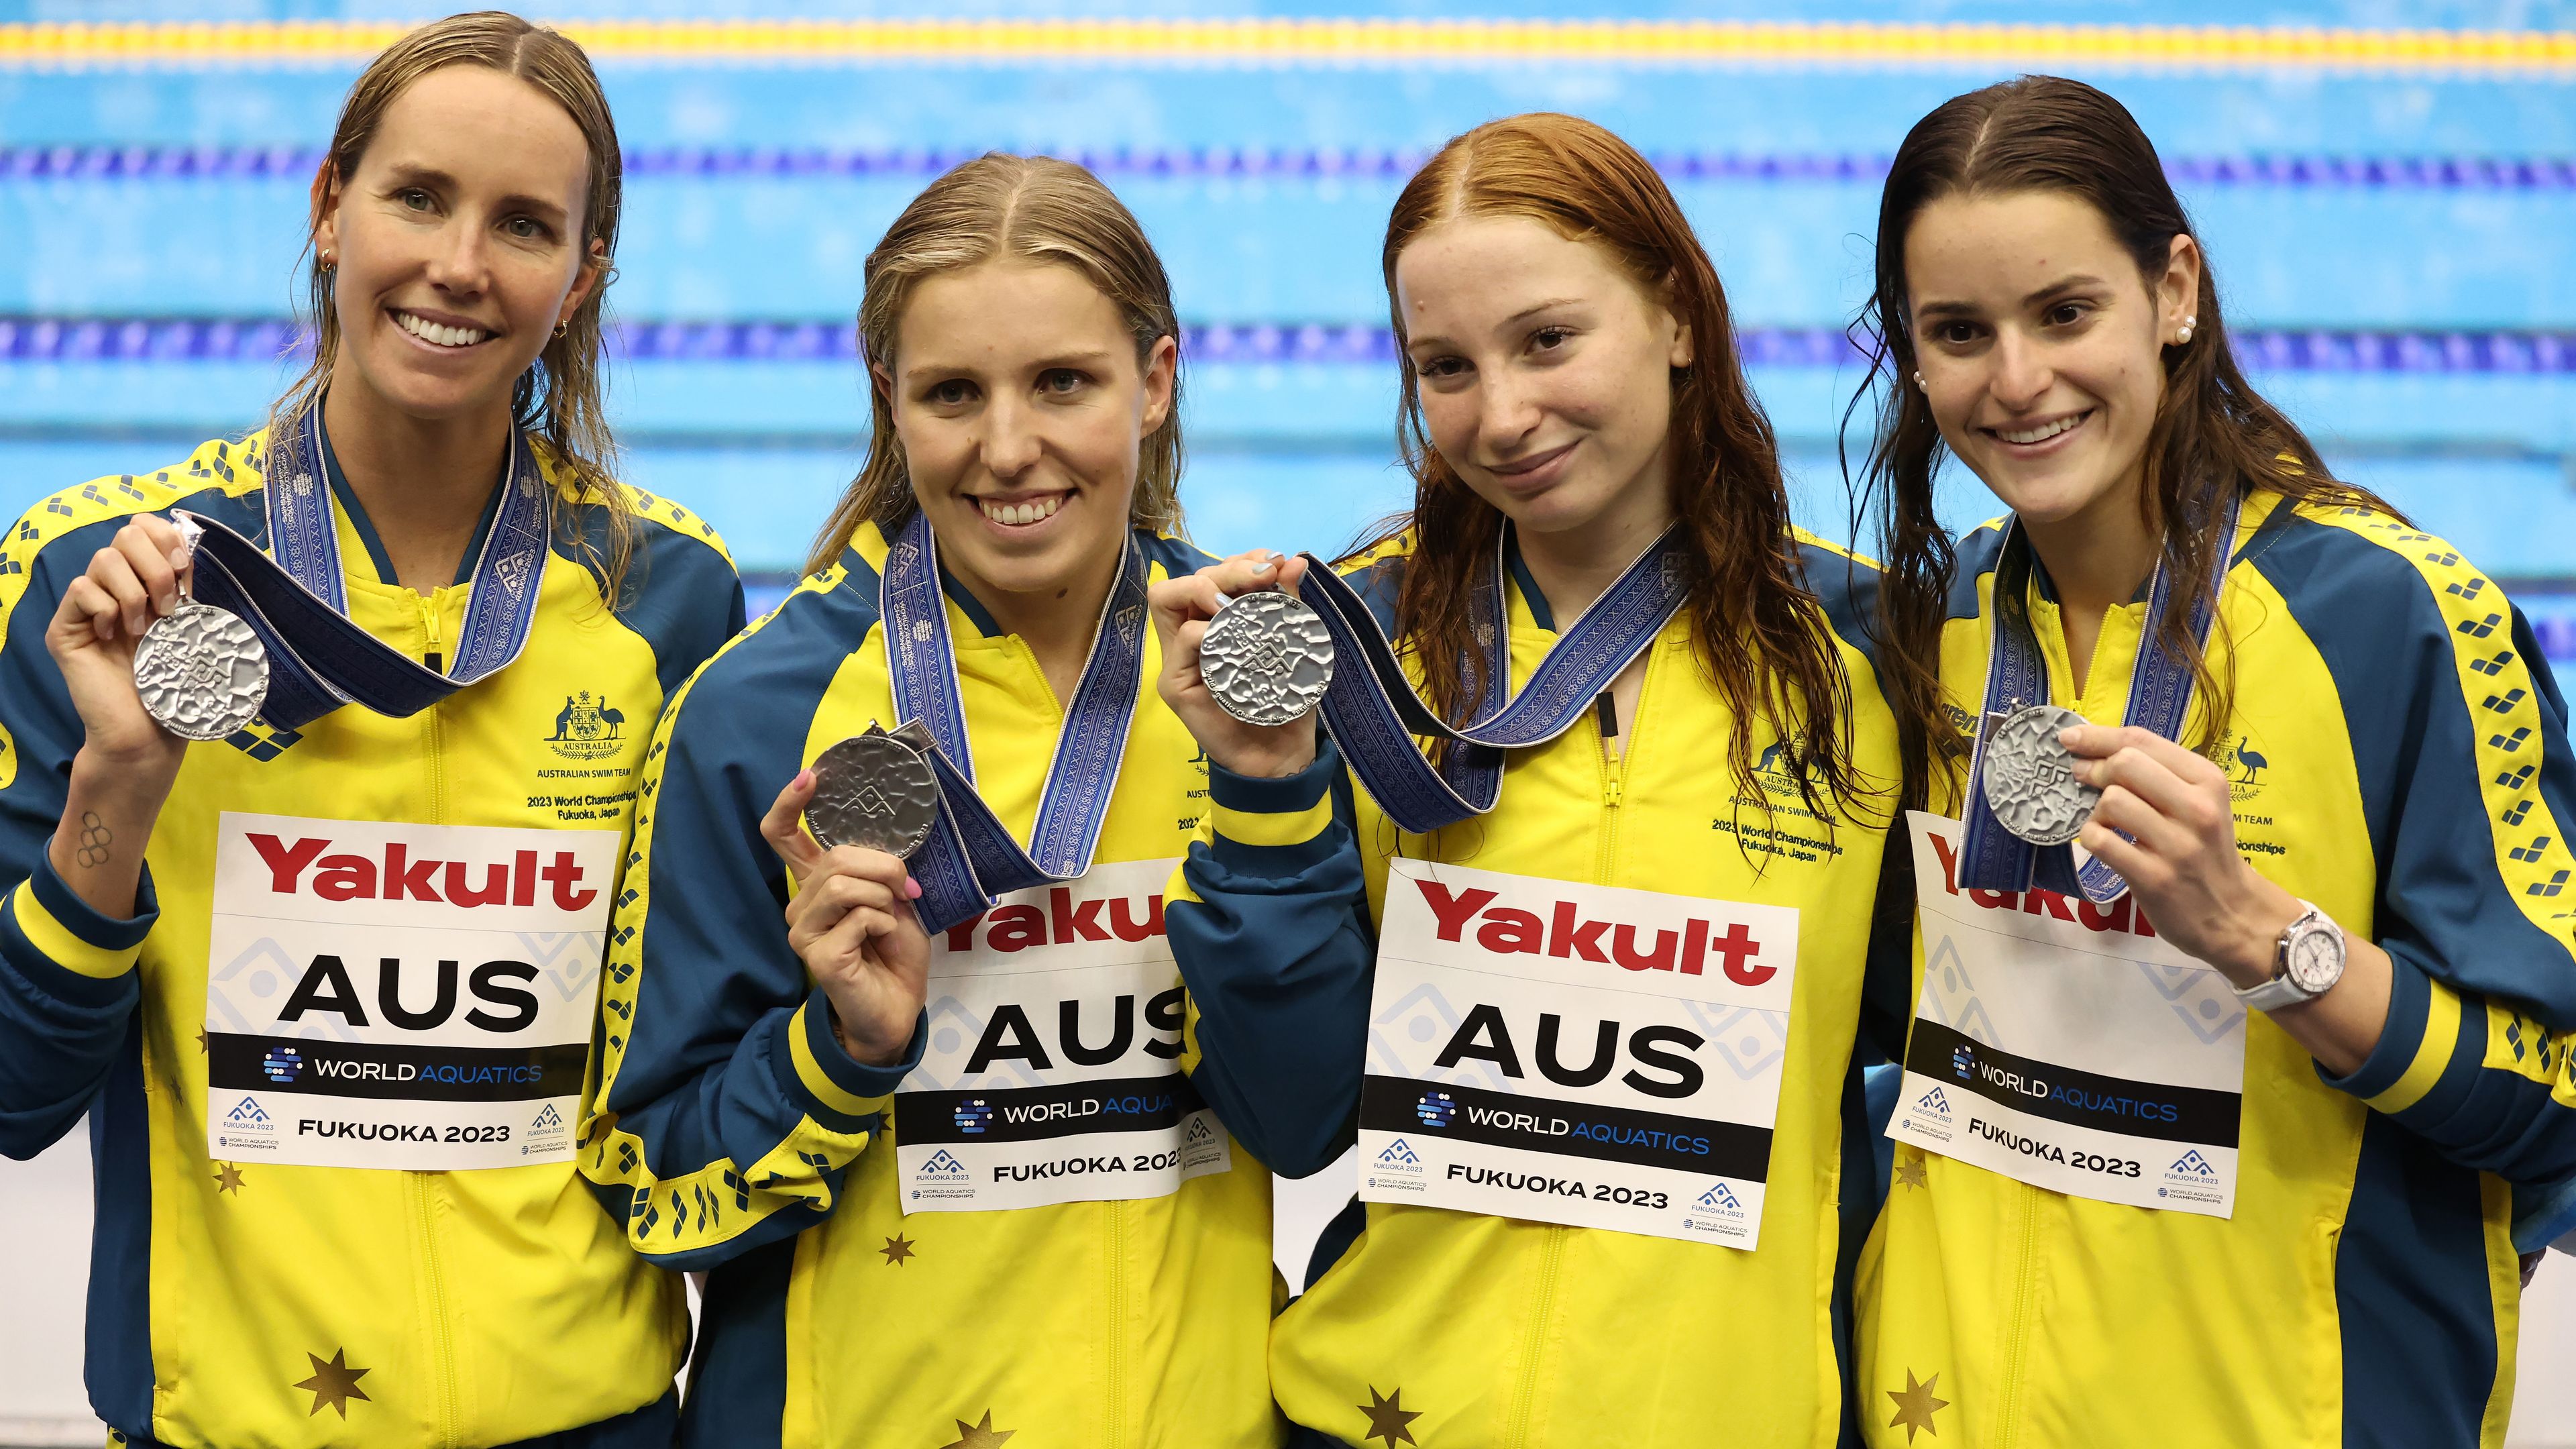 FUKUOKA, JAPAN - JULY 30: Silver medallists Abbey Harkin, Mollie O&#x27;Callaghan, Emma McKeon and Kaylee McKeown of Team Australia pose during the medal ceremony for the Women&#x27;s 4 x 100m Medley Relay Final on day eight of the Fukuoka 2023 World Aquatics Championships at Marine Messe Fukuoka Hall A on July 30, 2023 in Fukuoka, Japan. (Photo by Ian MacNicol/Getty Images)